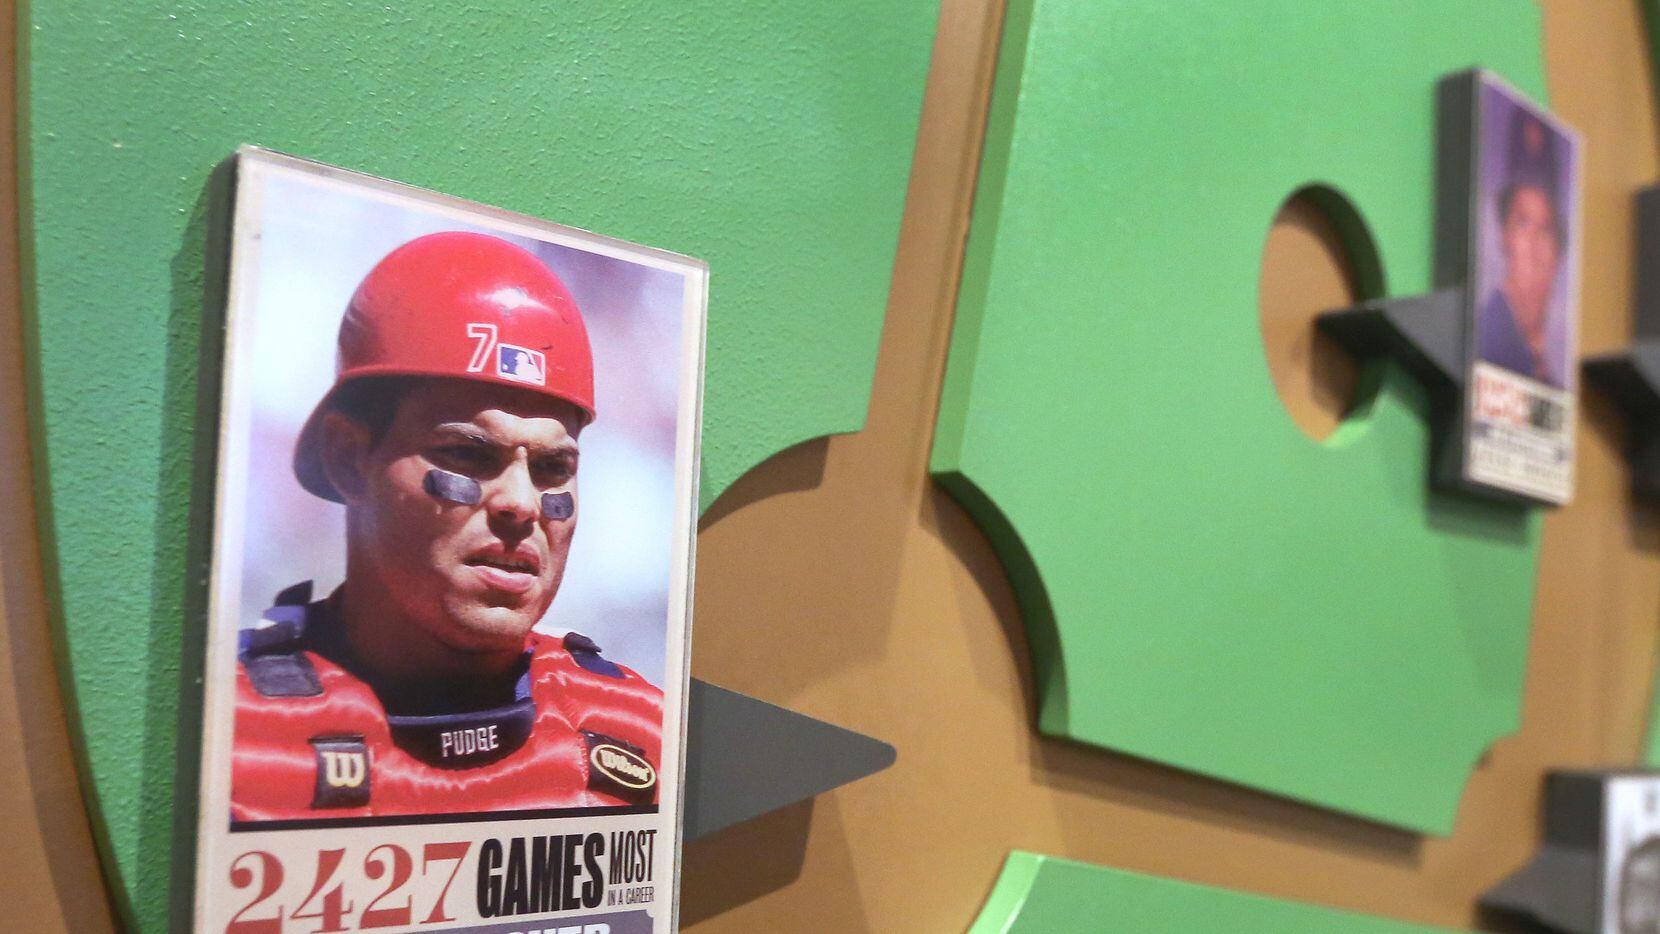 Former Texas Rangers catcher Pudge Rodriguez is included in a longevity exhibit (for most...